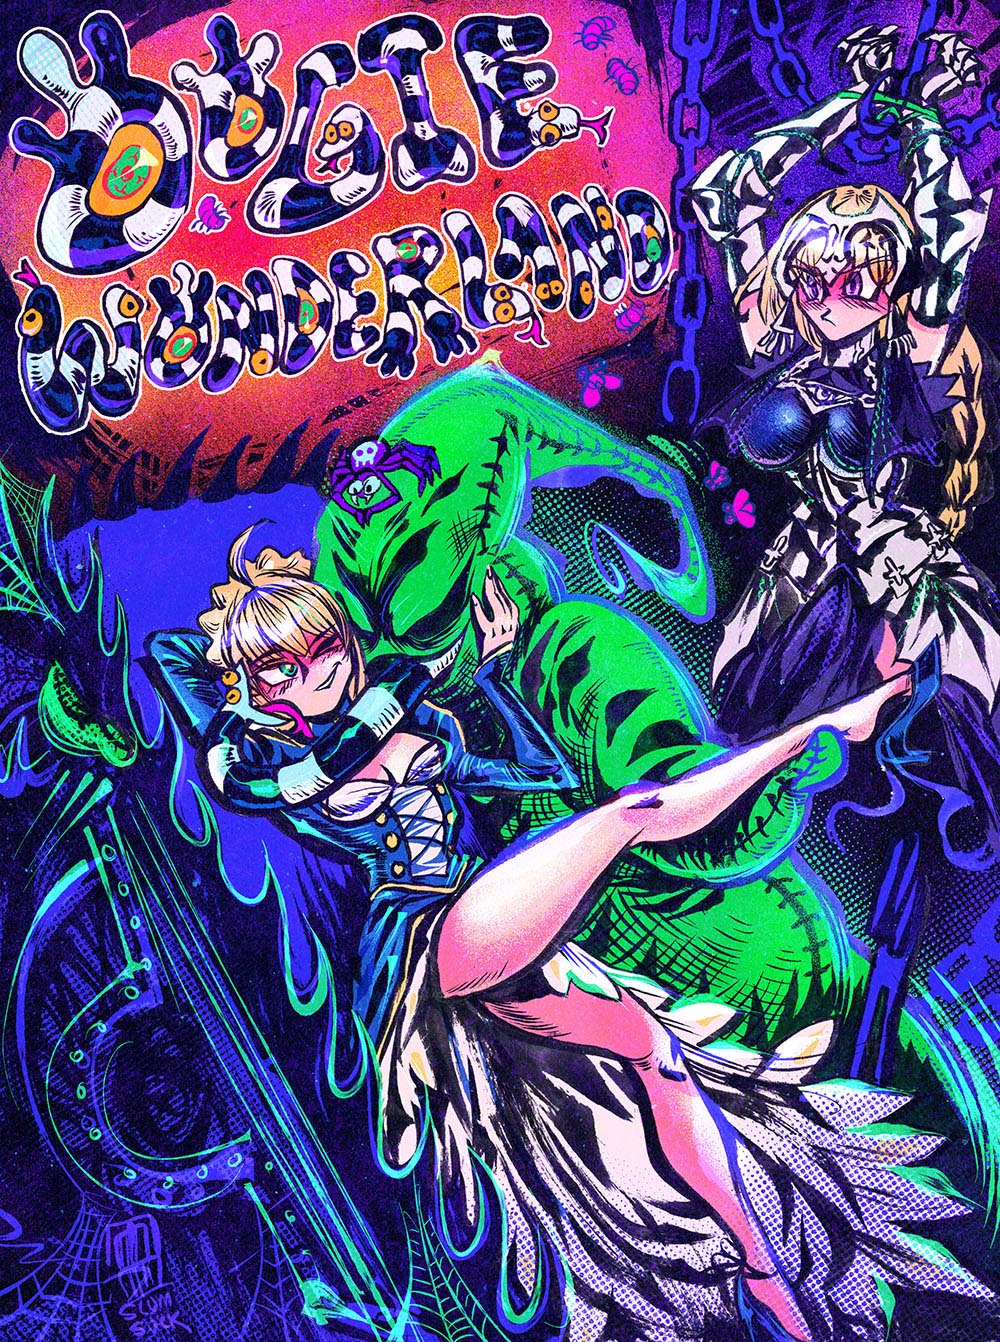 Cover illustration, titled Oogie Wonderland.  Oogie is holding saber's leg up while her heel dangles off her foot, and his tongue around her neck licking her face.  Saber flirts back, holding his face.  Jeanne is in the background pouting and chained.